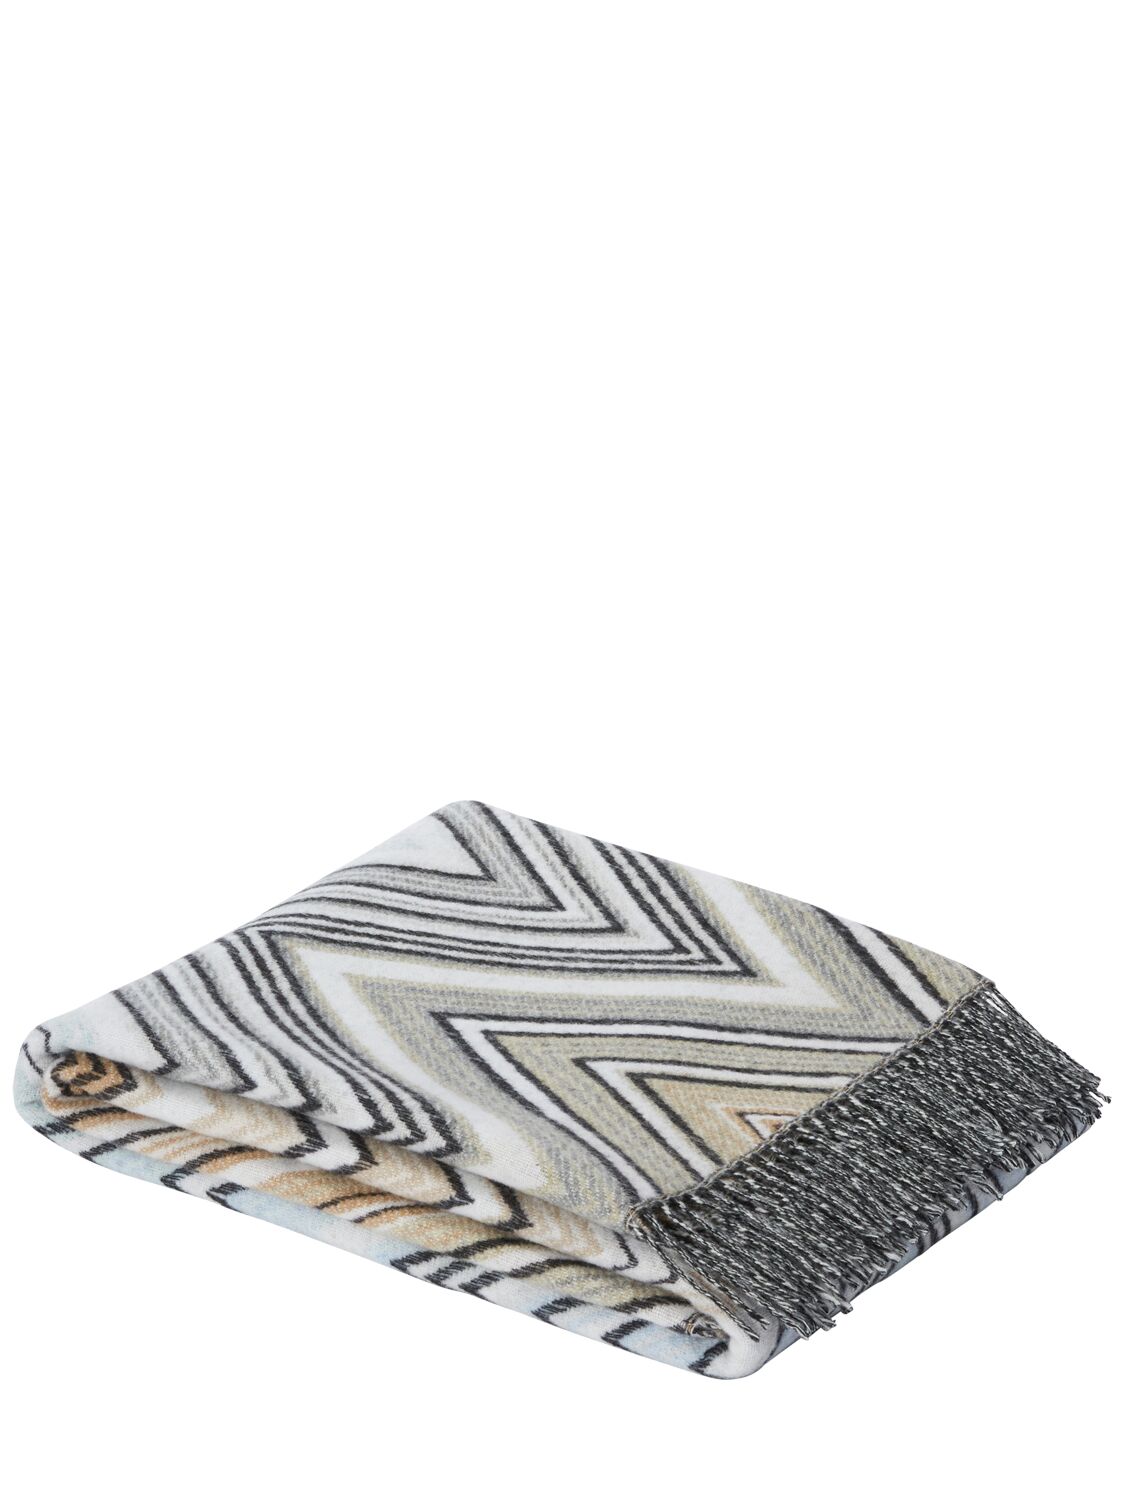 Missoni Home Collection Plume Throw In Multicolor